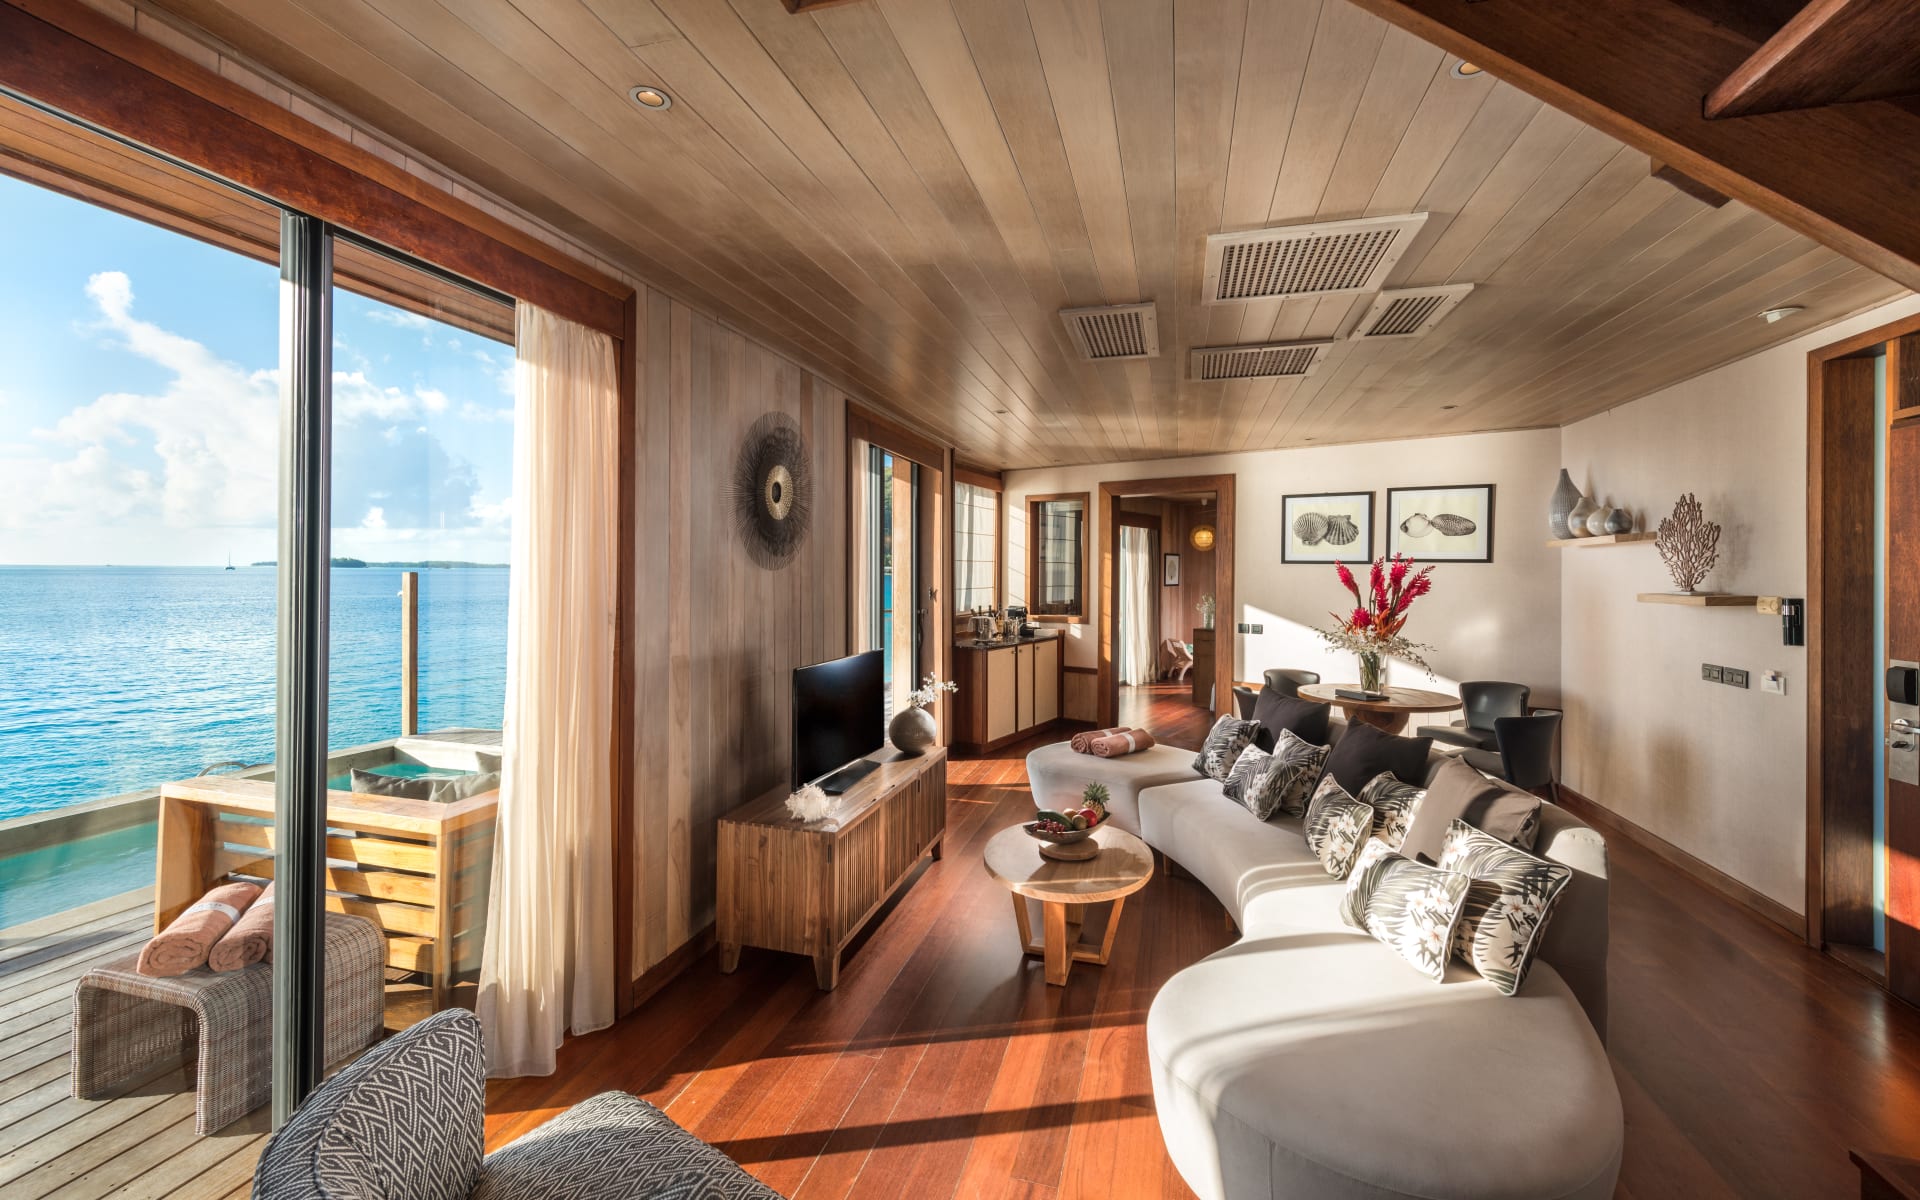 The living room has a large sofa and floor-to-ceiling windows opening up to the ocean. 